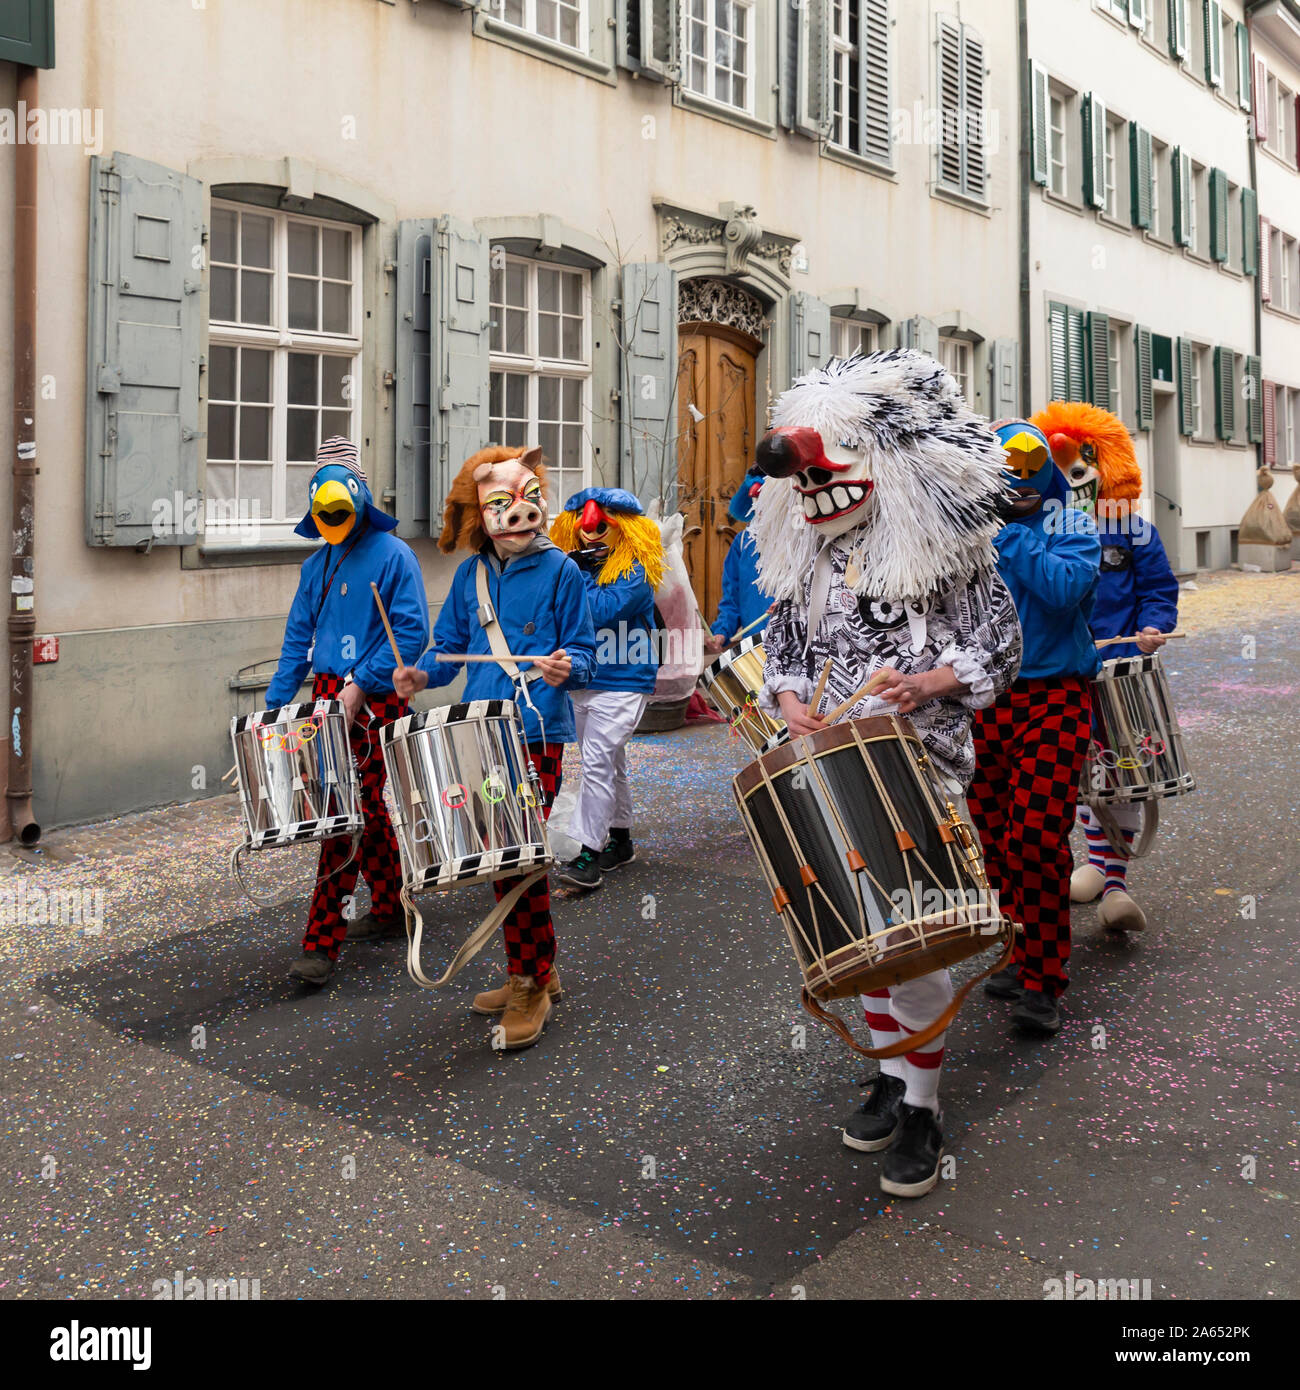 Nadelberg, Basel, Switzerland - March 12th, 2019. Close-up of a snare drum player group Stock Photo